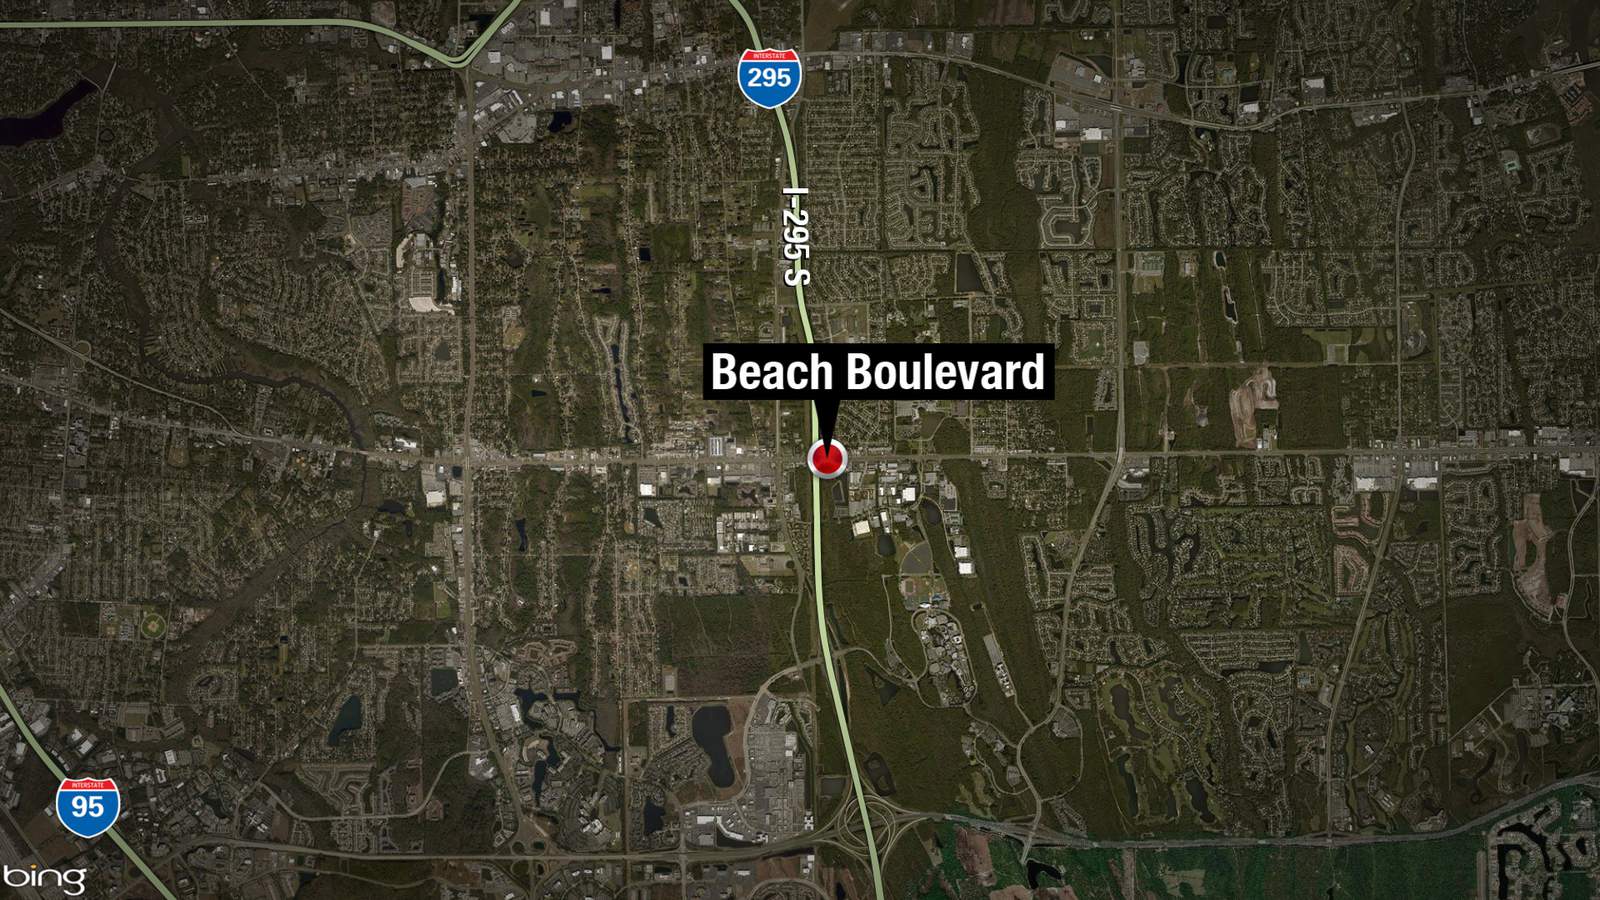 Troopers: Scooter rider killed in crash with truck that left scene on Beach Boulevard